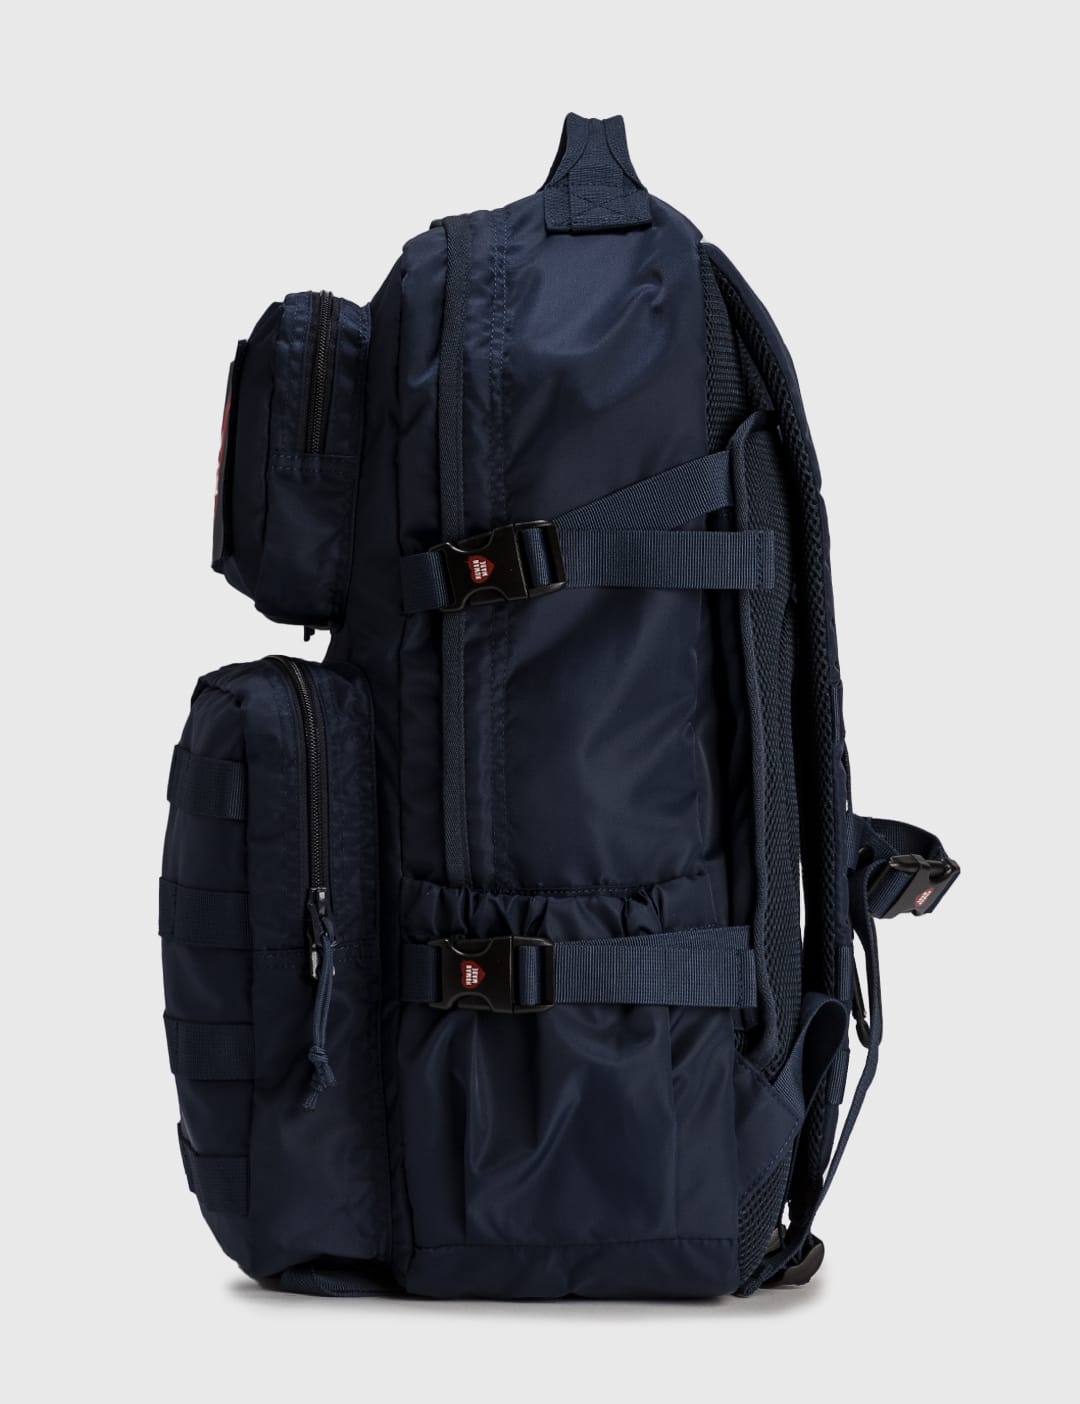 Human Made - Military Backpack | HBX - Globally Curated Fashion